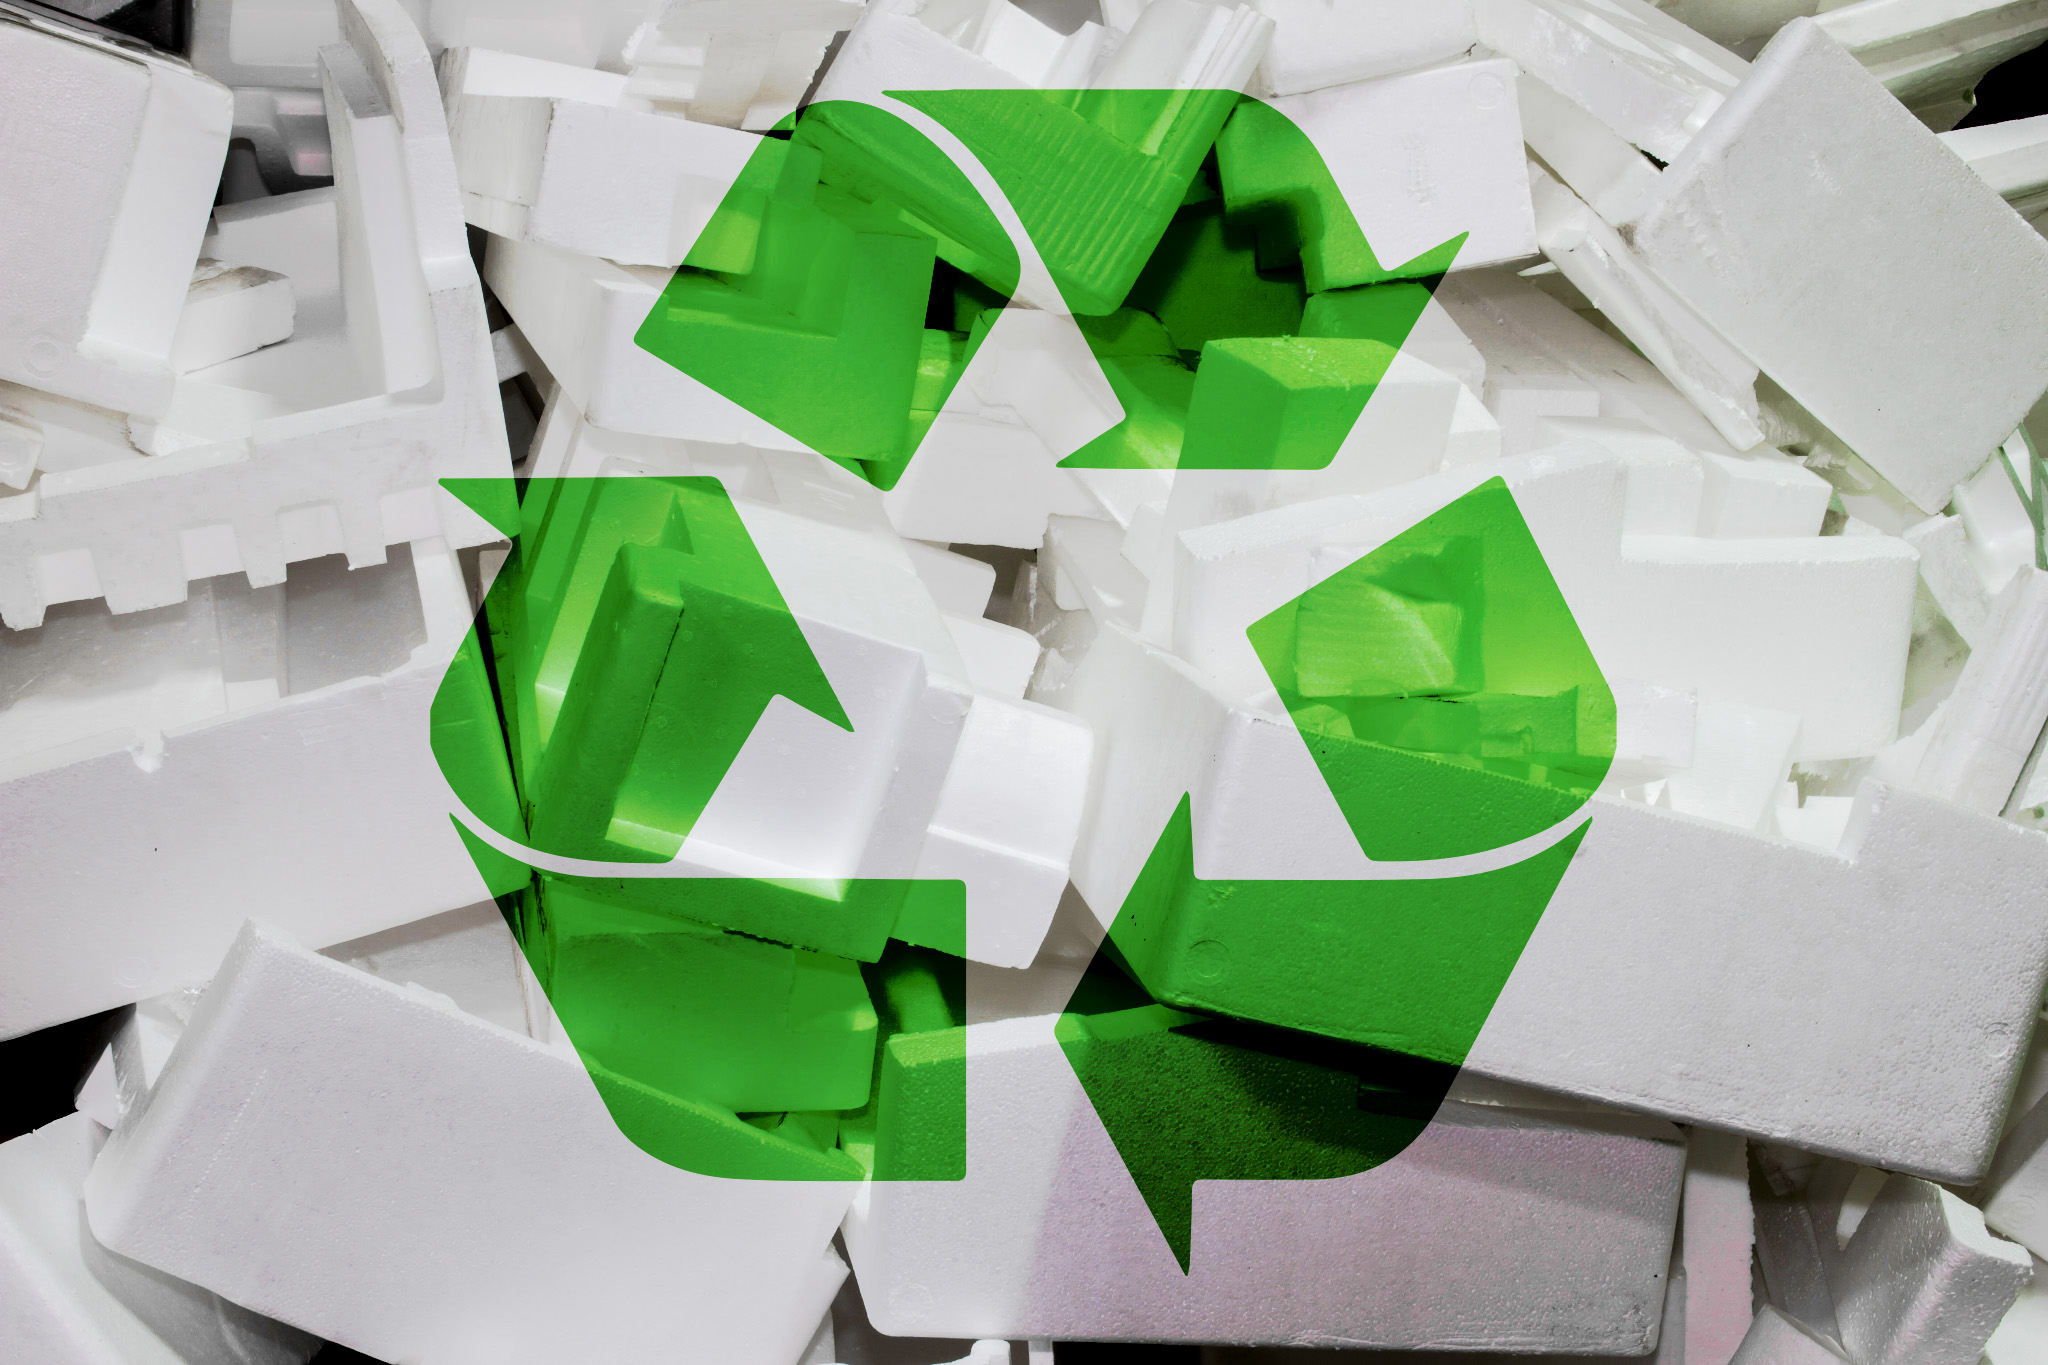 Expanded Polystyrene EPS can be recycled